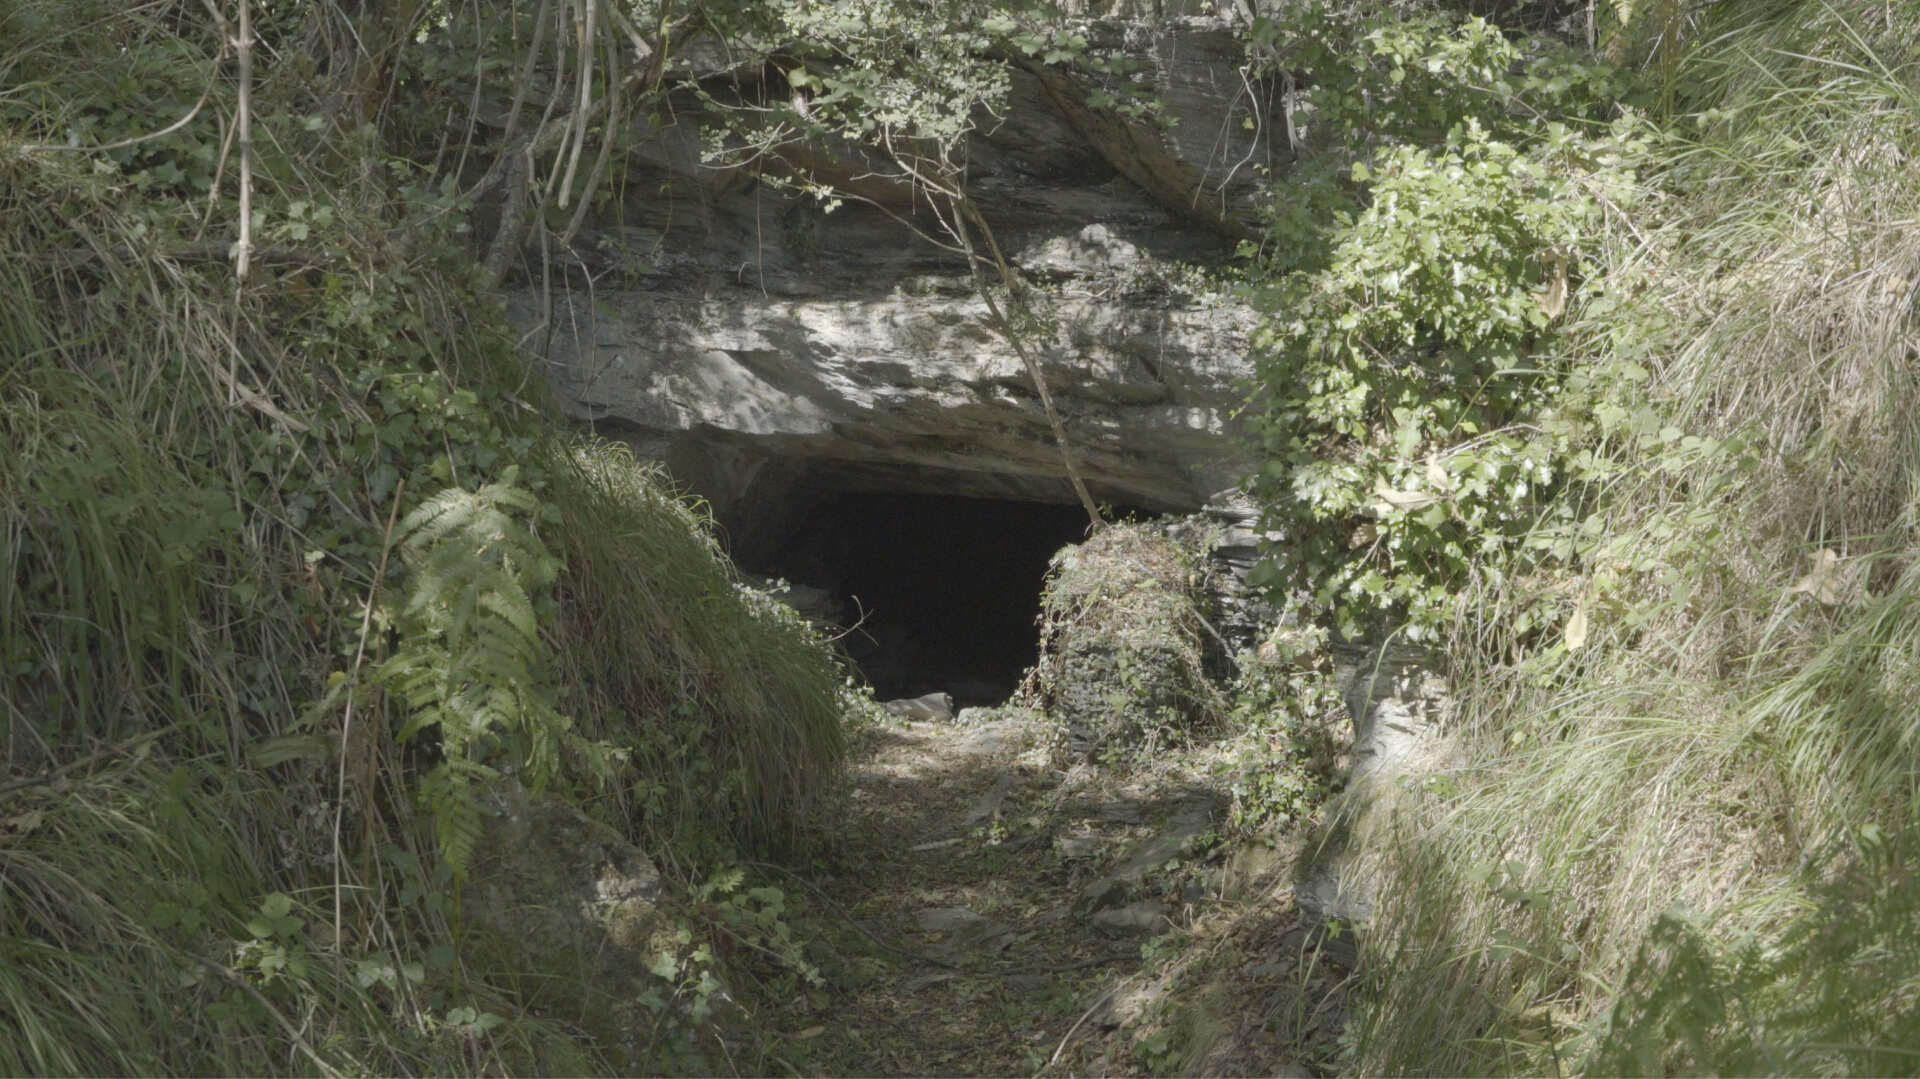 The entrance of an old cave